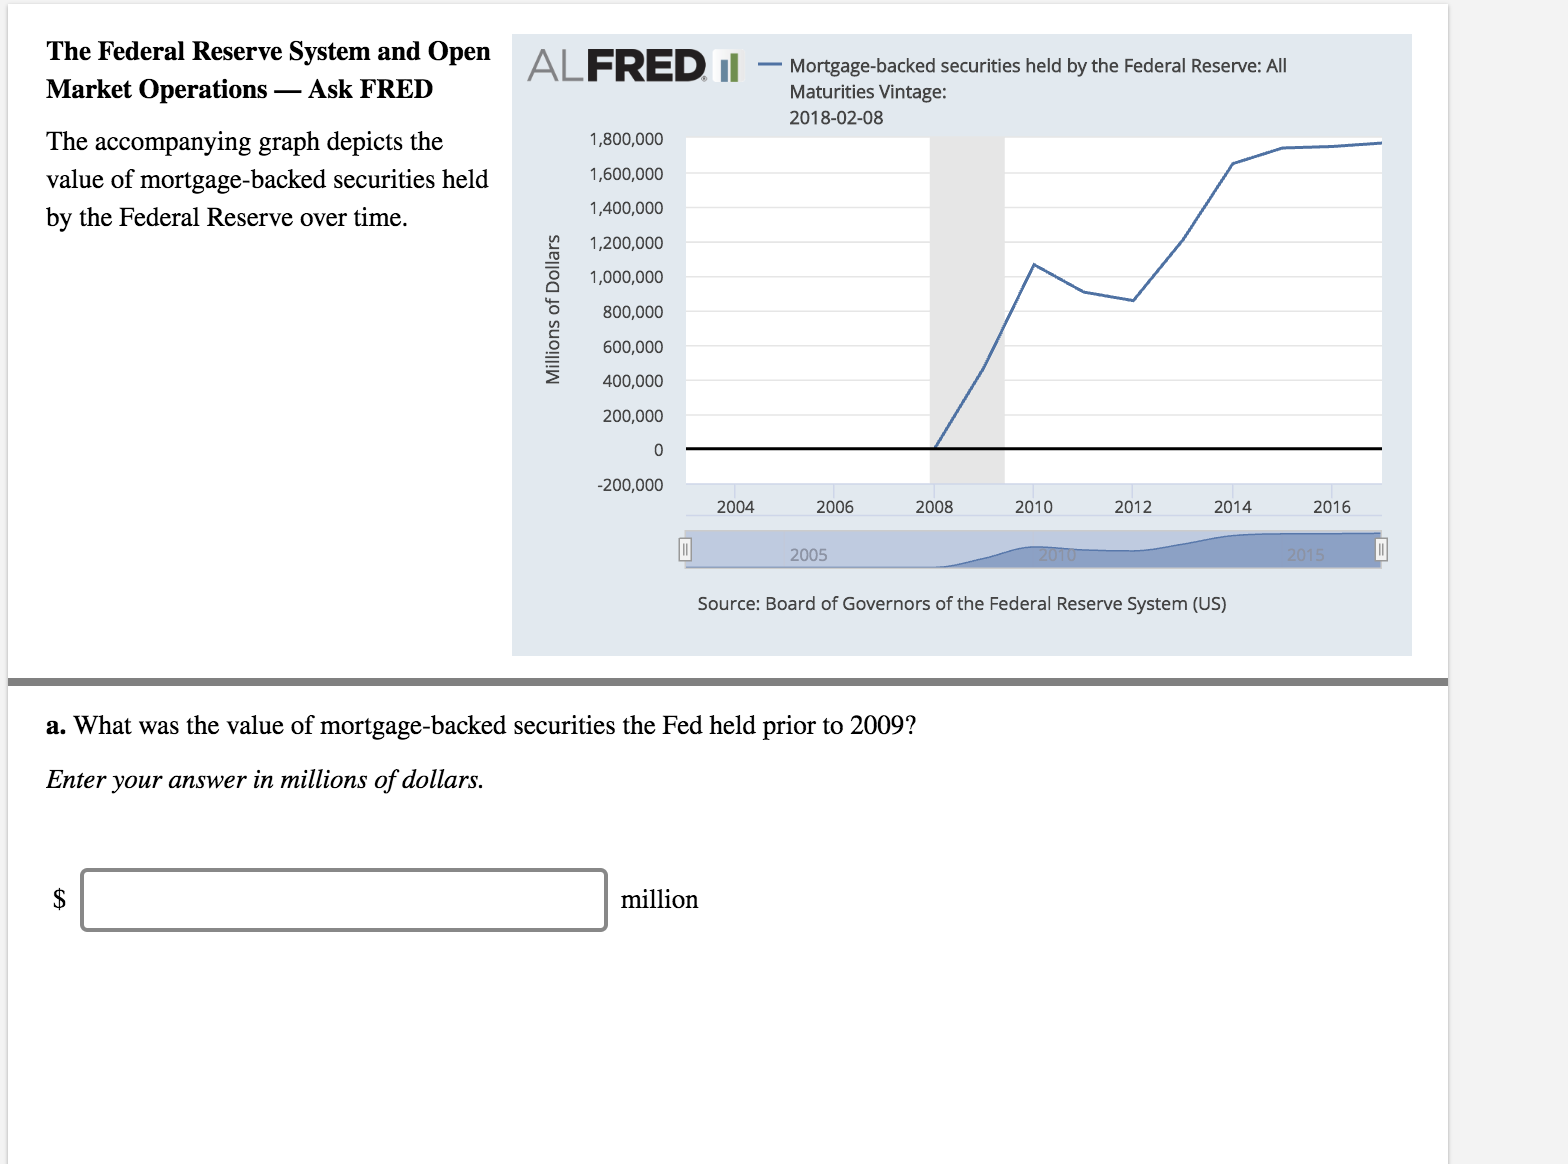 The Federal Reserve System and Open
Market Operations_ Ask FRED
The accompanying graph depicts the
value of mortgage-backed securities held
by the Federal Reserve over time.
ALFRED IlMorgage-backed securities held by the Federal Reserve: All
Maturities Vintage
2018-02-08
1,800,000
1,600,000
1,400,000
1,200,000
O 1.000,000
800,000
600,000
400,000
200,000
-200,000
2004
2006
2008
2010
2012
2014
2016
2005
Source: Board of Governors of the Federal Reserve System (US)
a. What was the value of mortgage-backed securities the Fed held prior to 2009?
Enter your answer in millions of dollars
million
